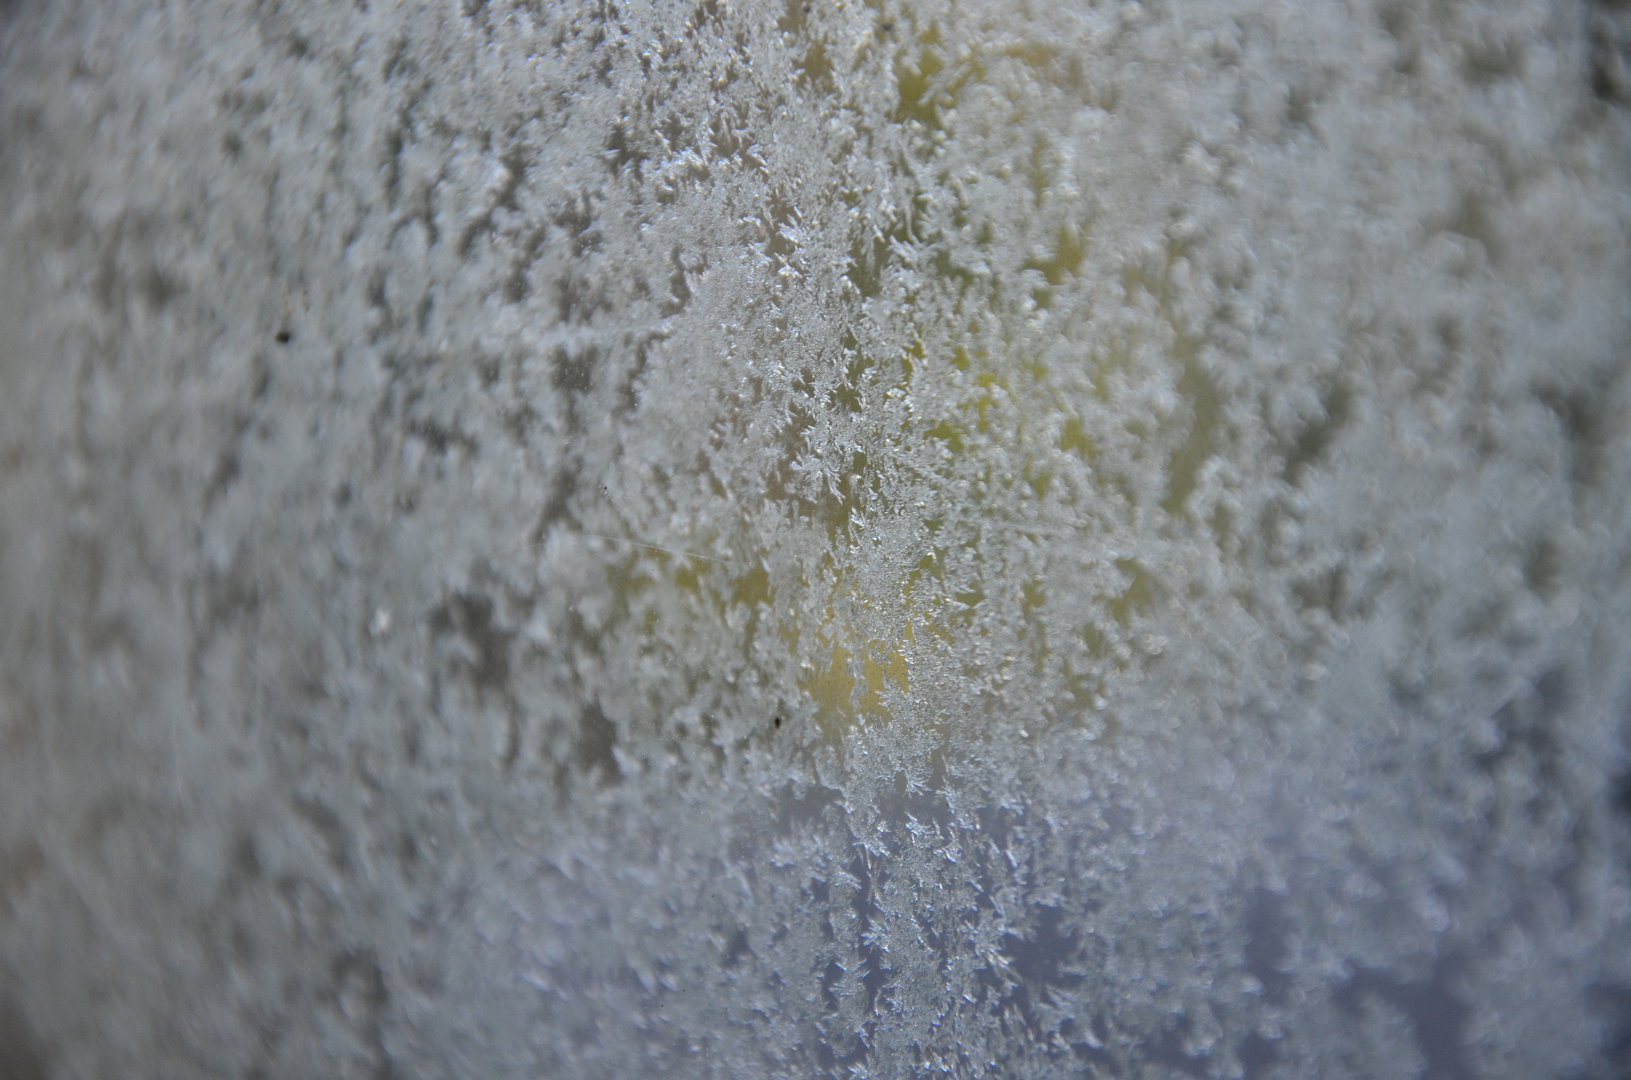 Ice crystals on a glass pane